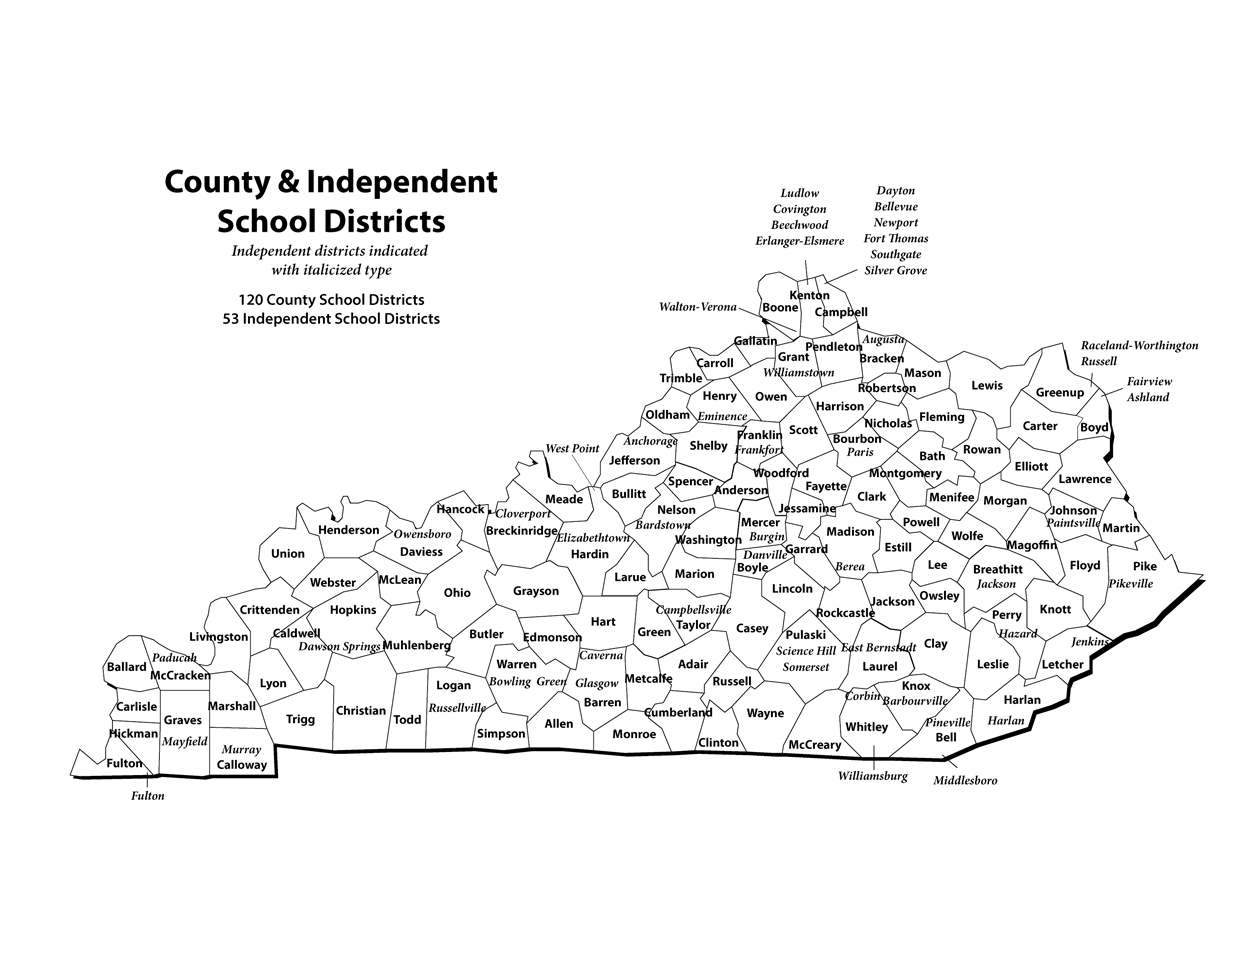 Kentucky School Districts Map KY school District MAP 2012 – Soft Shoe